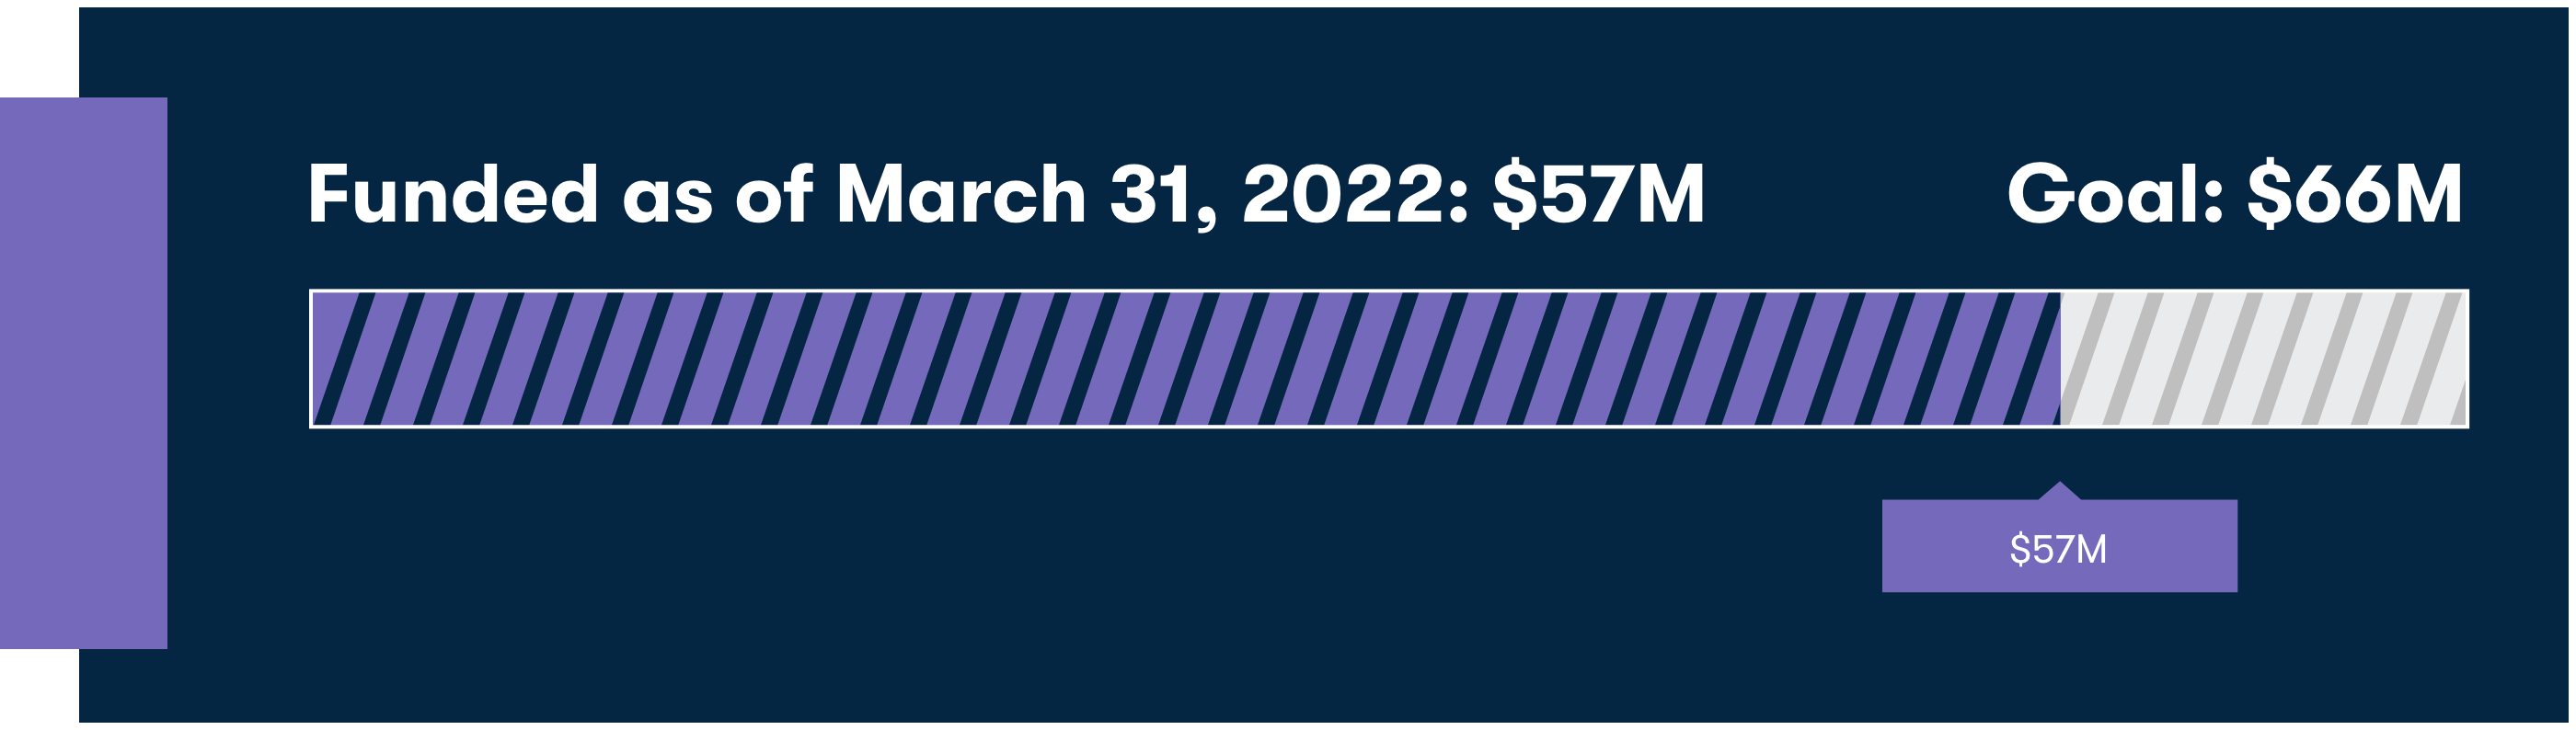 A graph showing a progress bar at $57M saying Funded as of March 31, 2022 and Goal: $66M